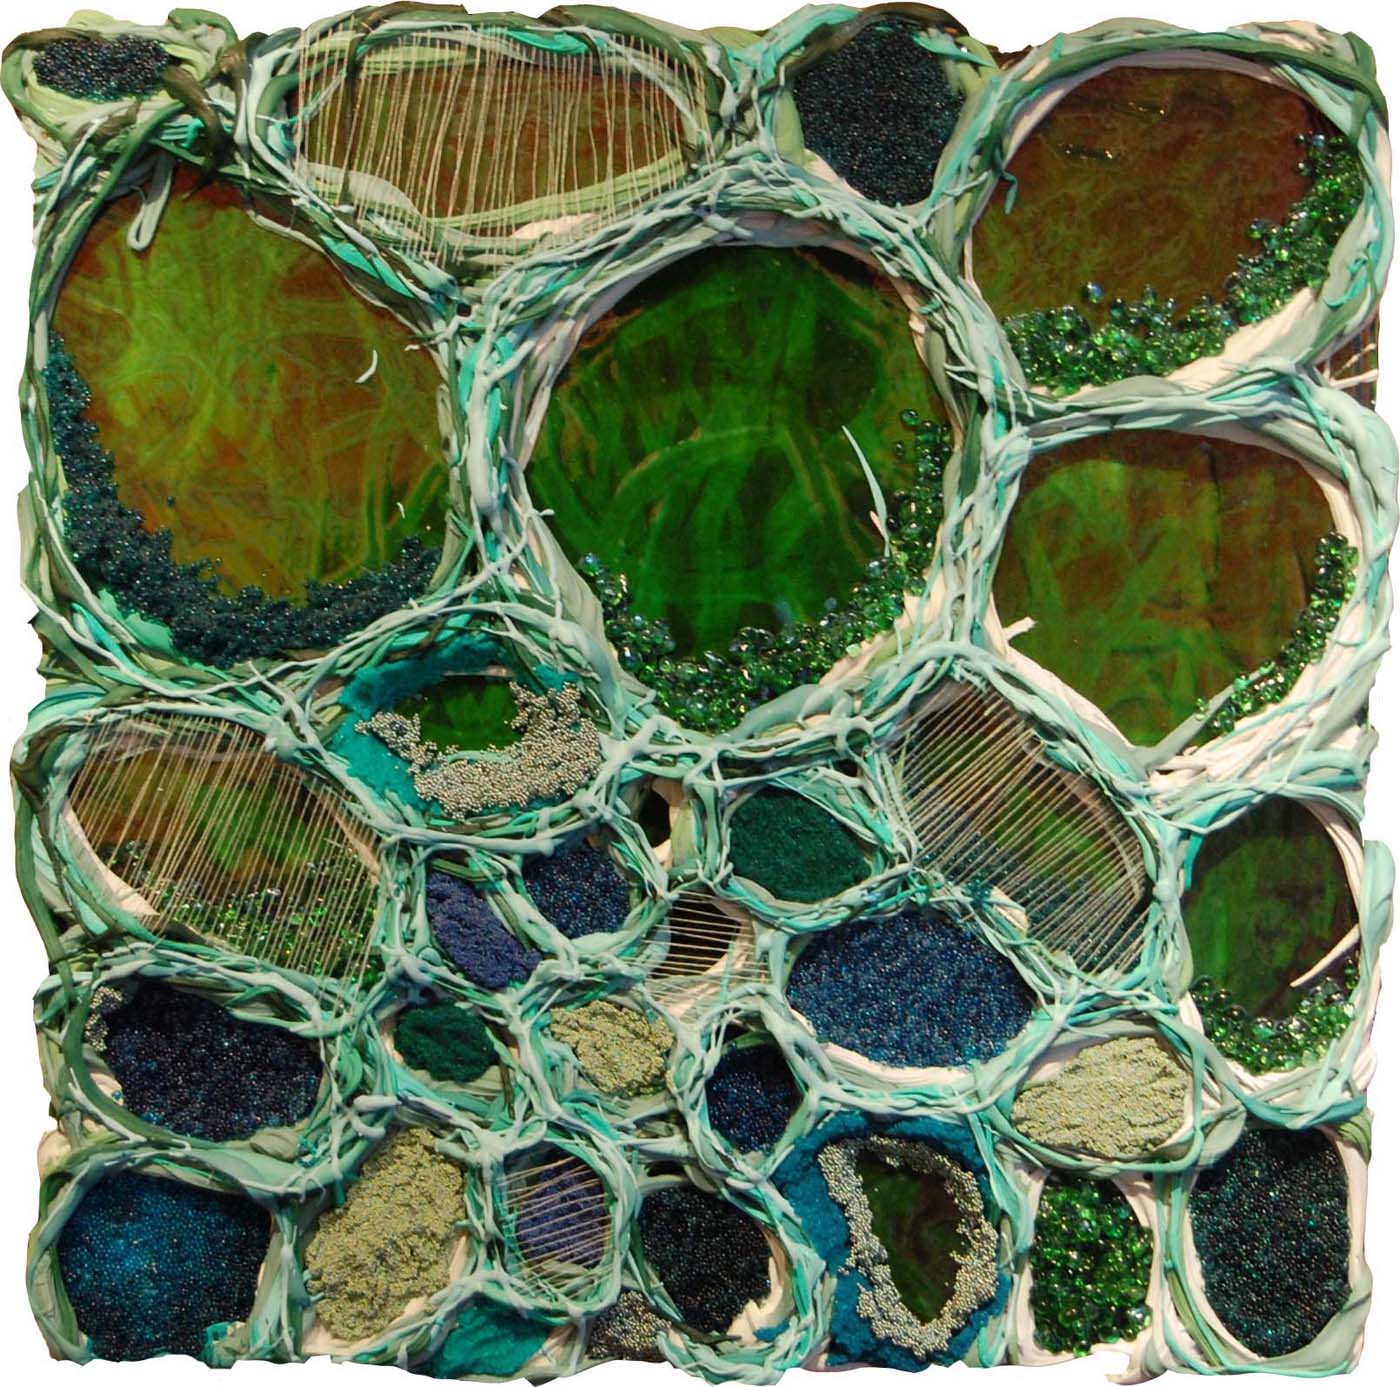 Aquatic Corpuscles II, 2010, Ultralight, urethane, pigment dispersions, and thread on panel, 22 x 24 inches, private collection